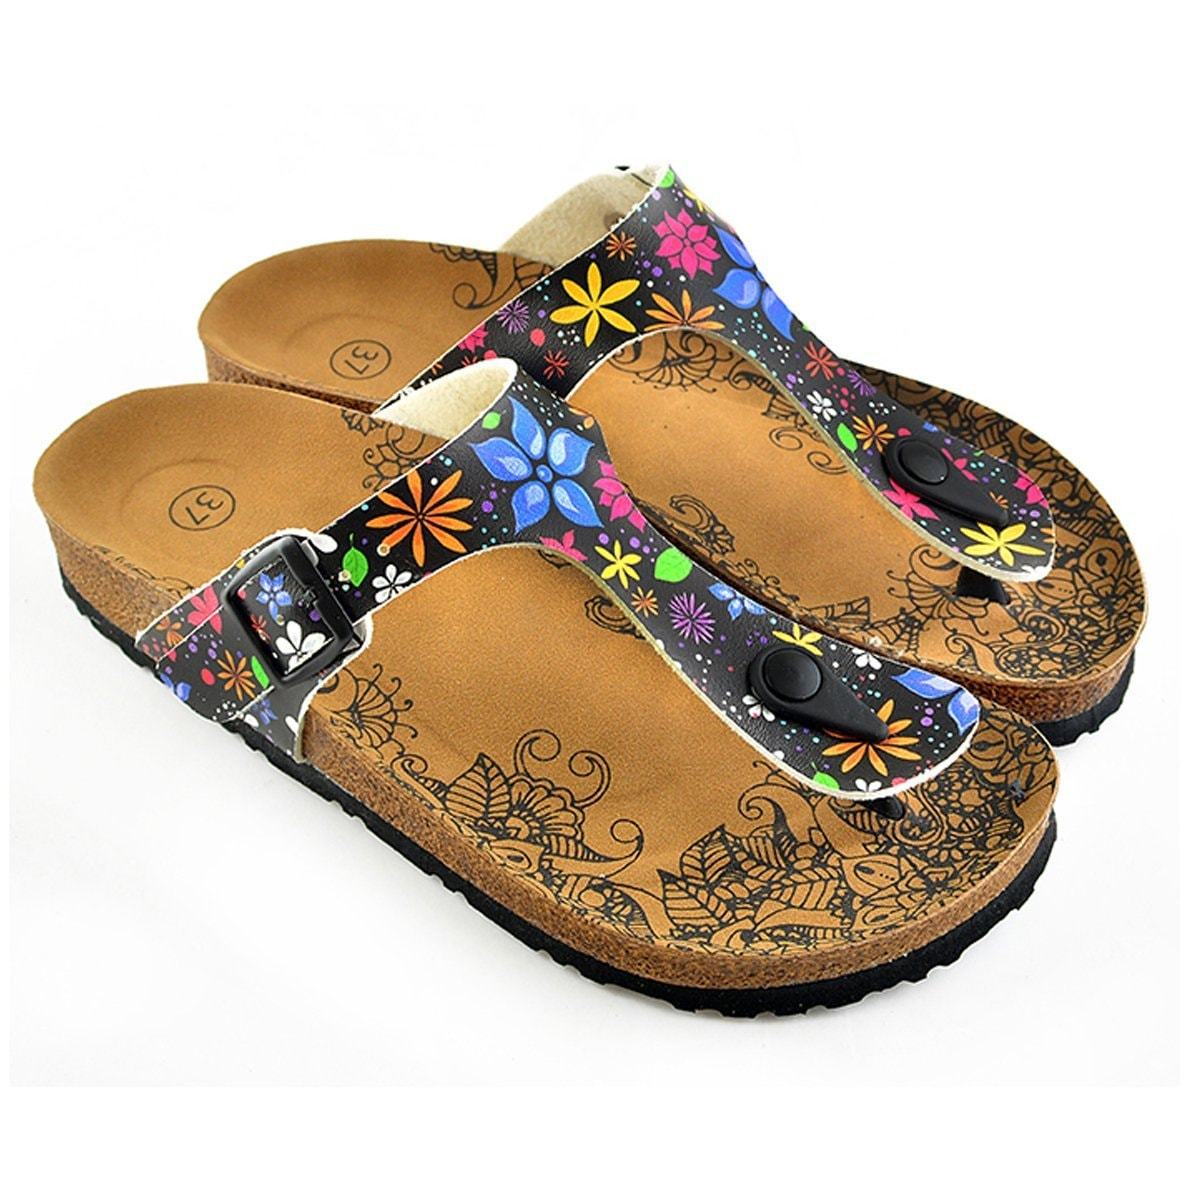 Black Colored and White Bright, Colored Flowers Patterned Sandal - CAL512